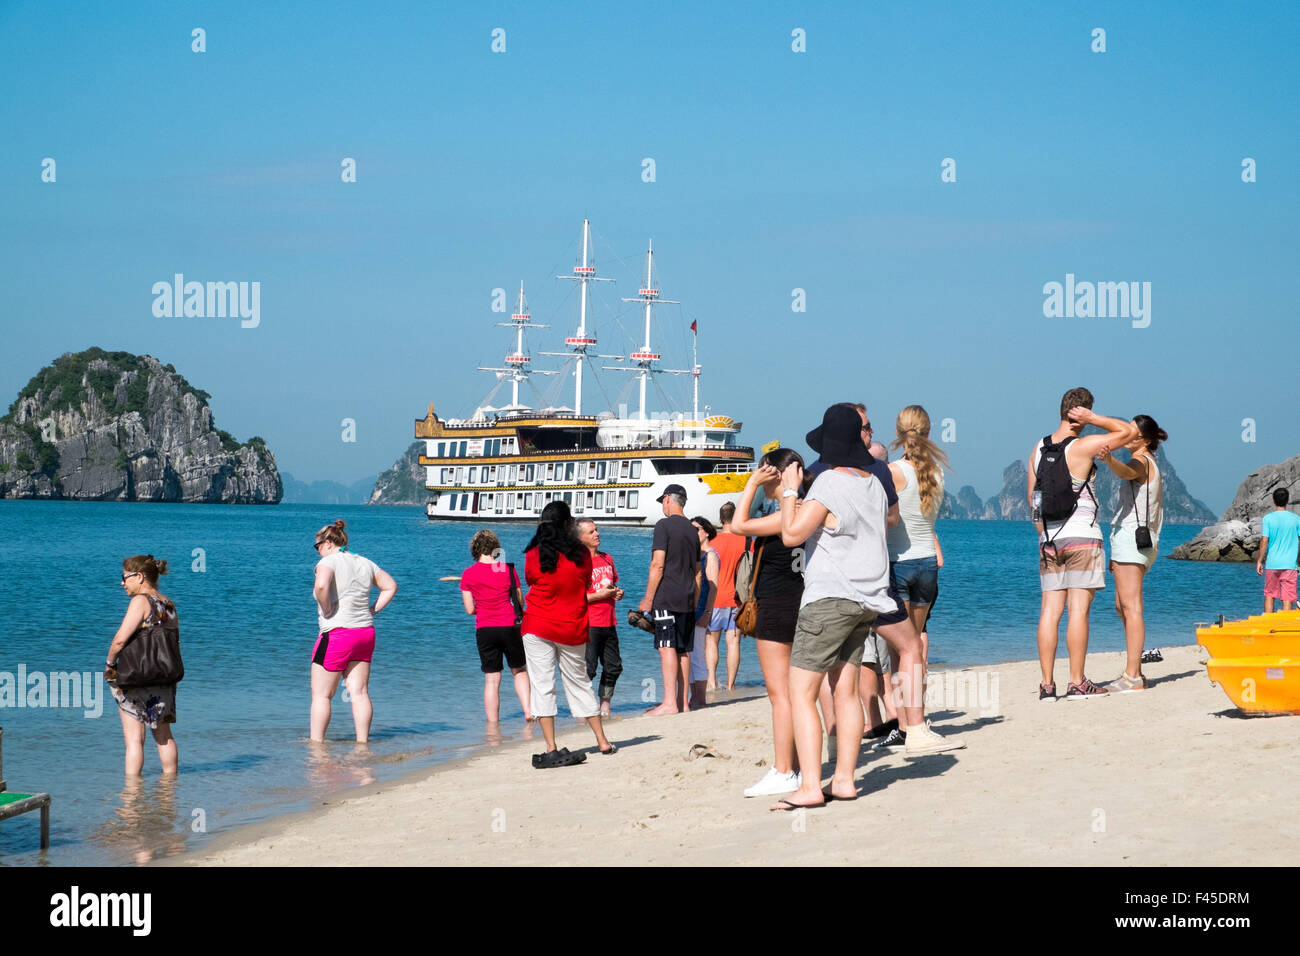 Tourists from Dragon legend One boat on the beach at Cang Do island, Bai Tu long bay in Halong bay, Vietnam, Asia Stock Photo